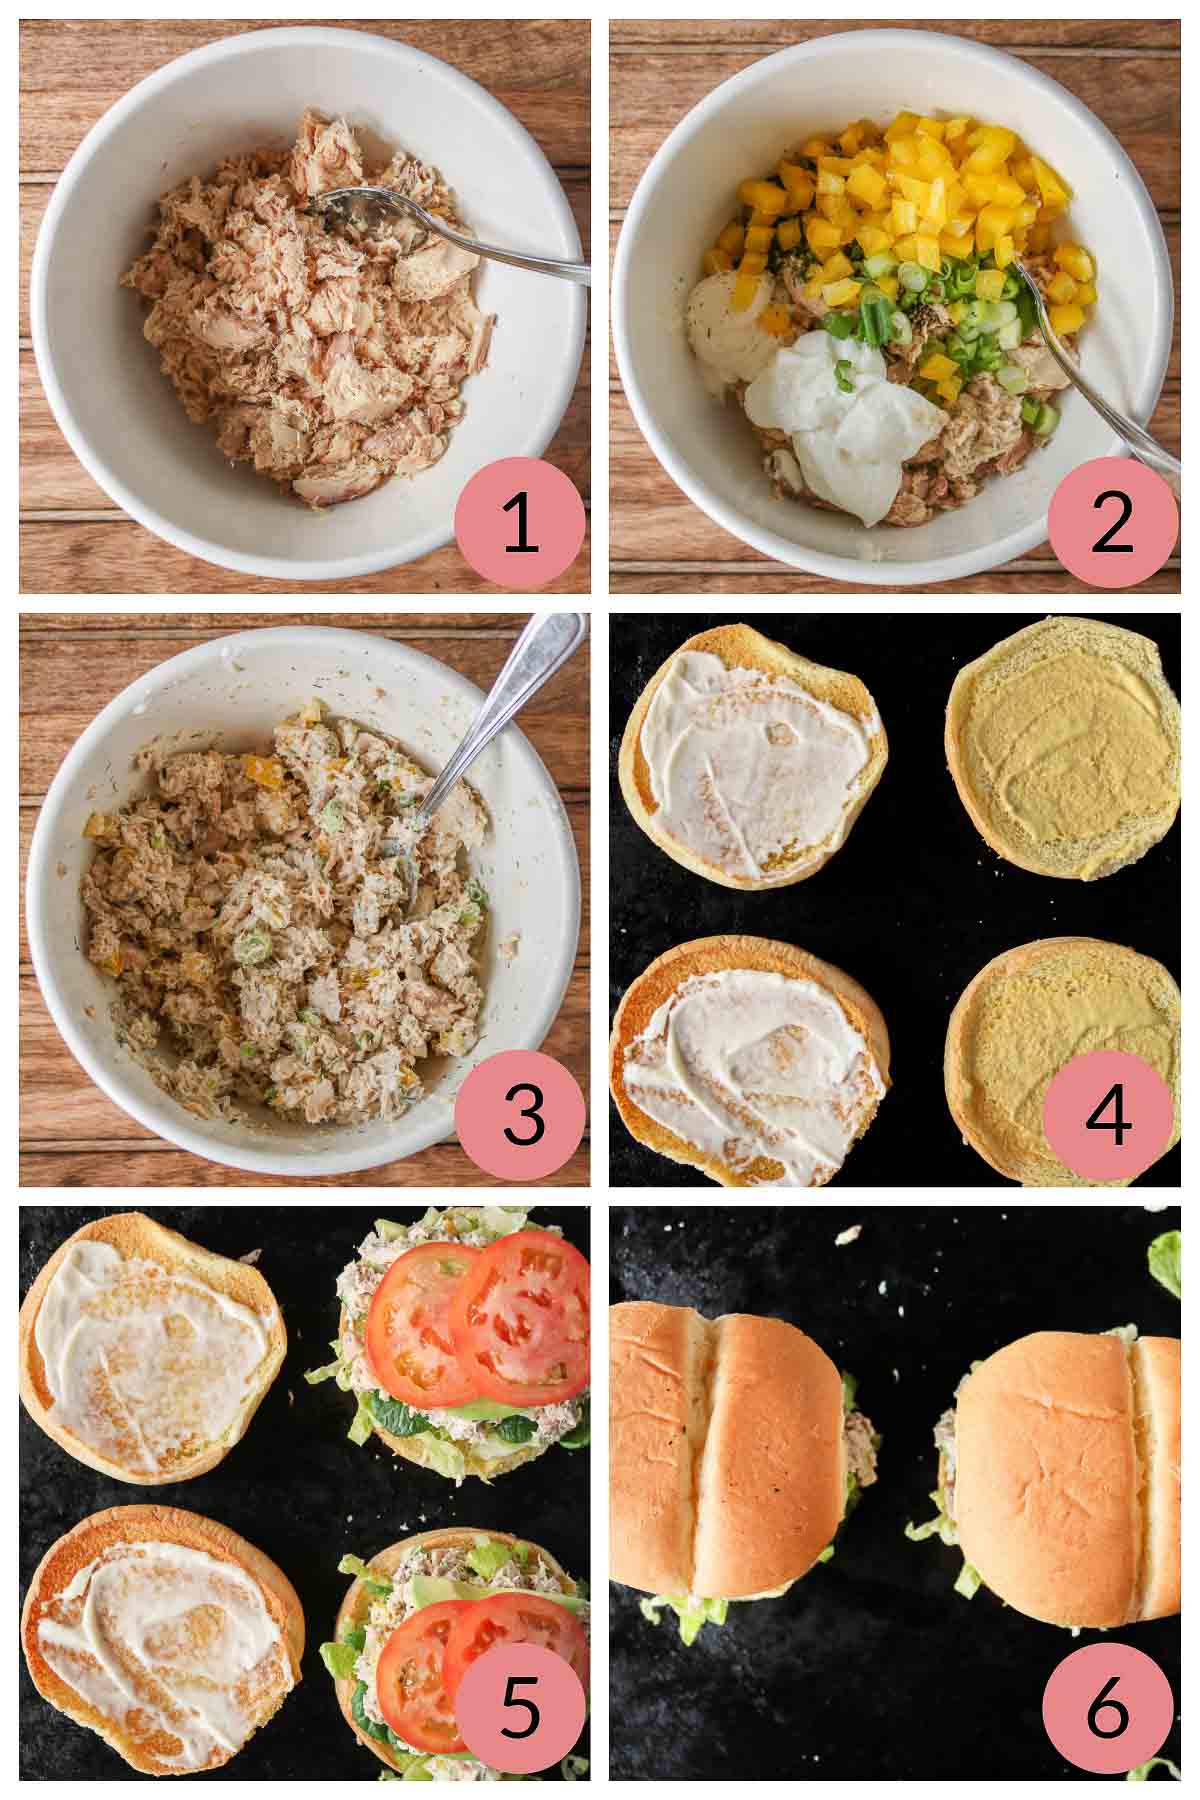 Collage of steps to make canned salmon salad sandwiches with veggies.